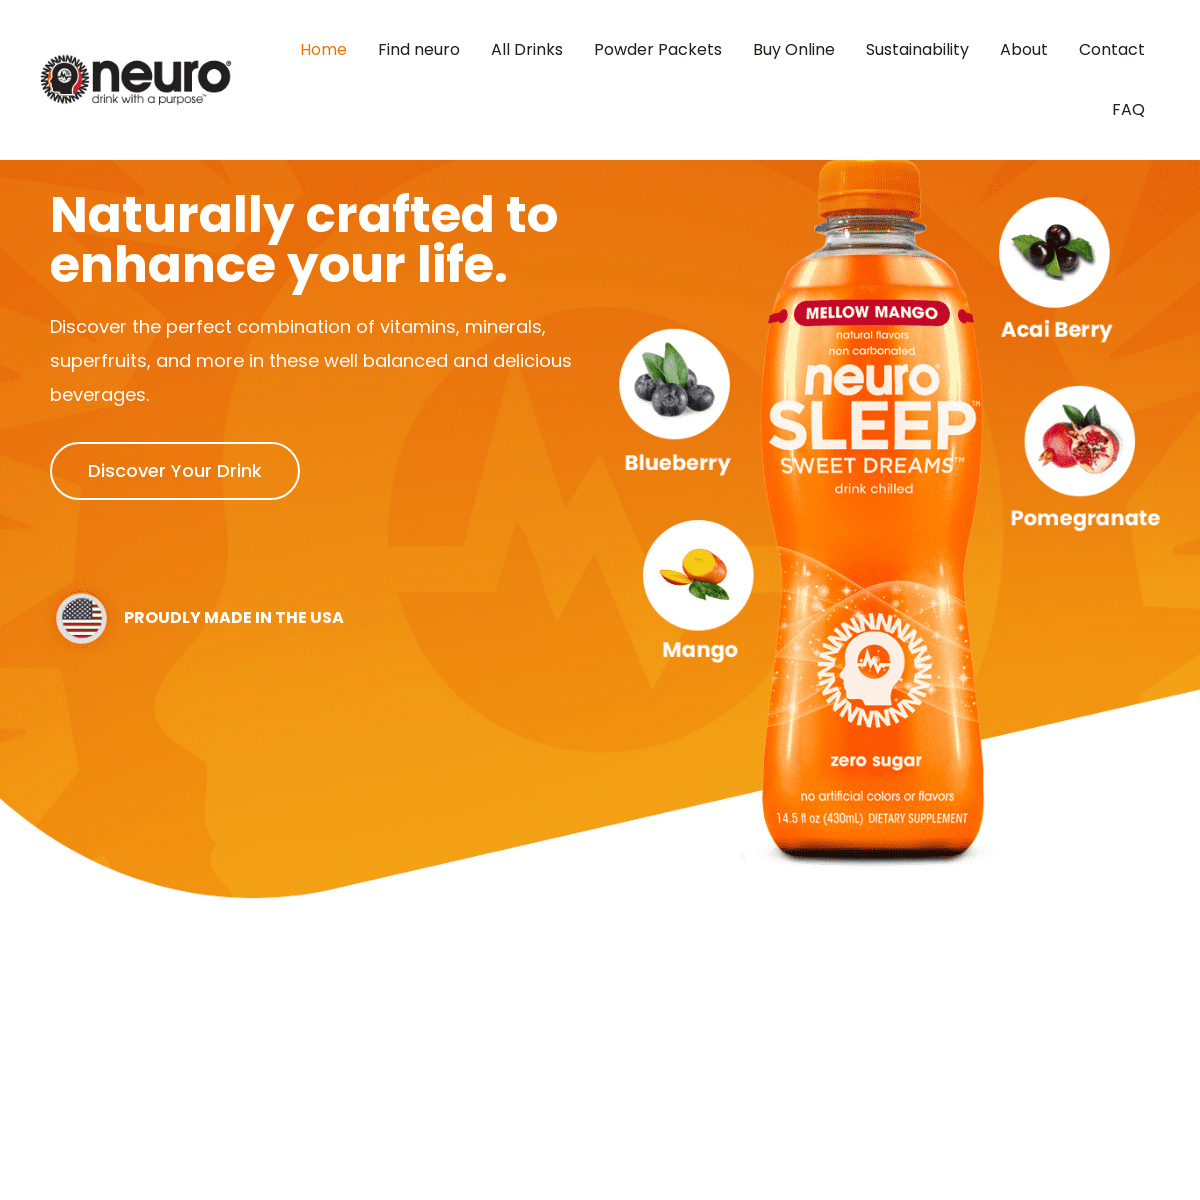 A complete backup of https://drinkneuro.com